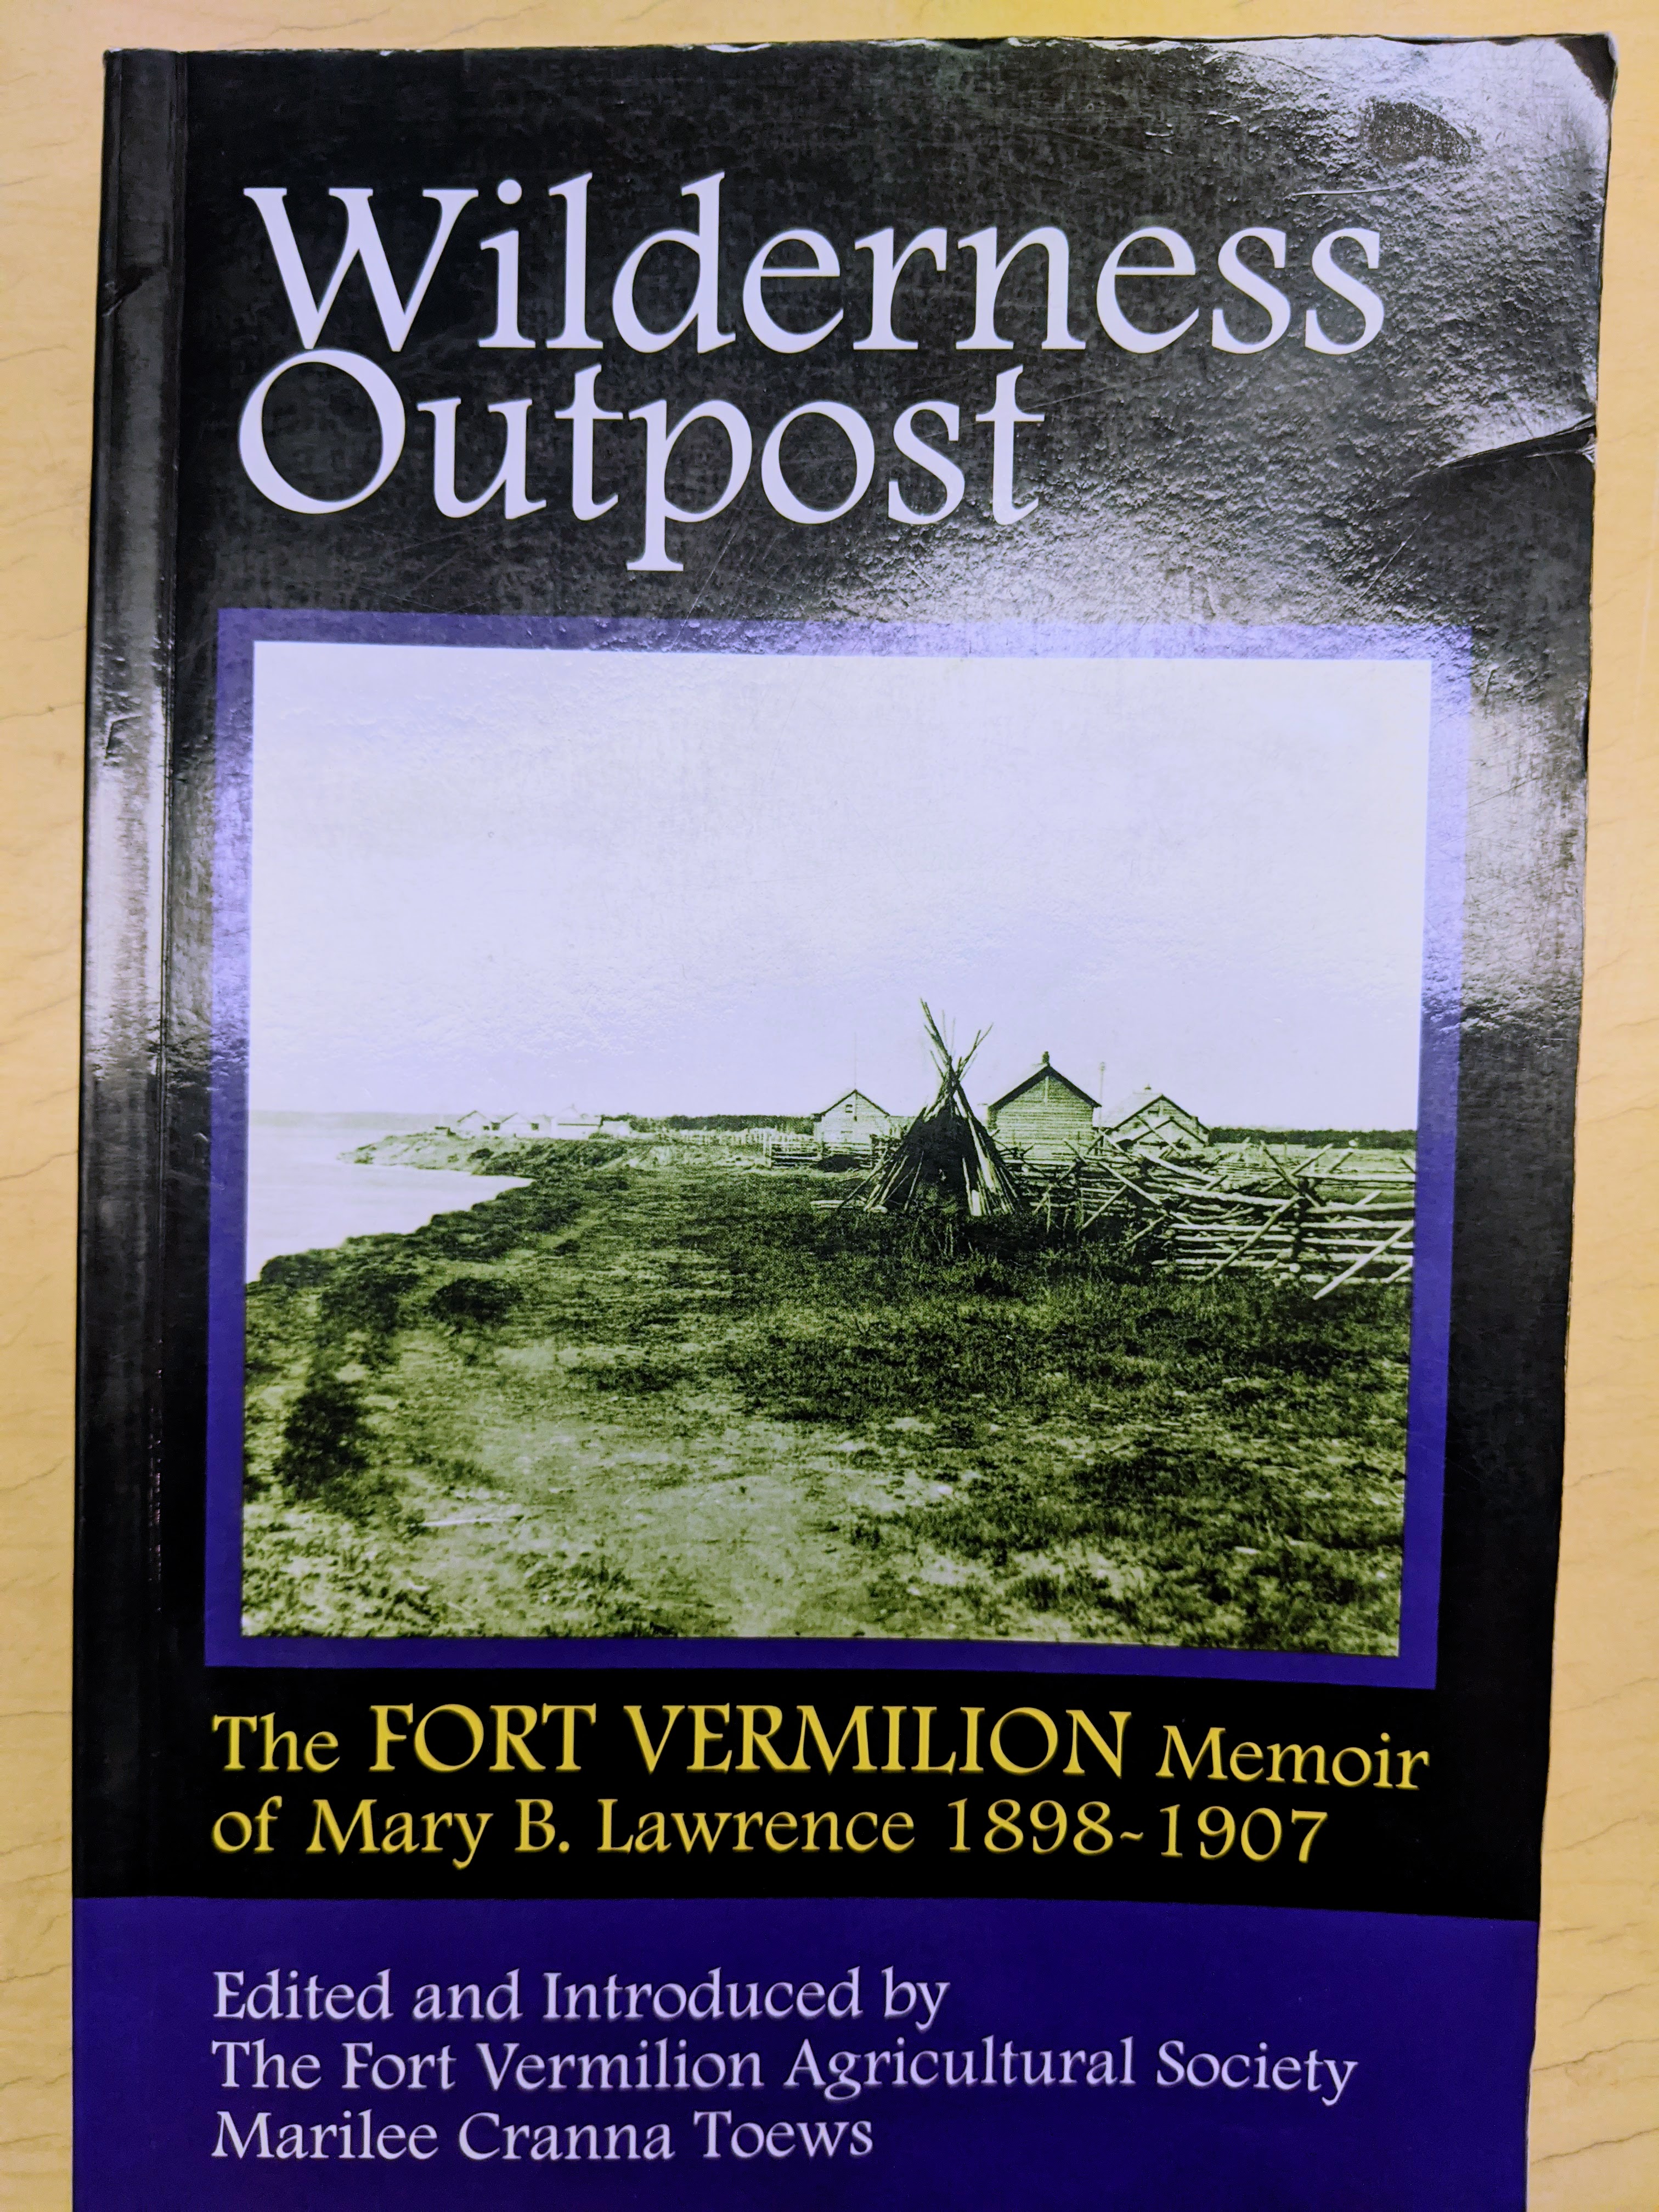 A thrilling tale of pioneer life - documenting the love, loss, hardships and humor of life in Fort Vermilion. $25.00